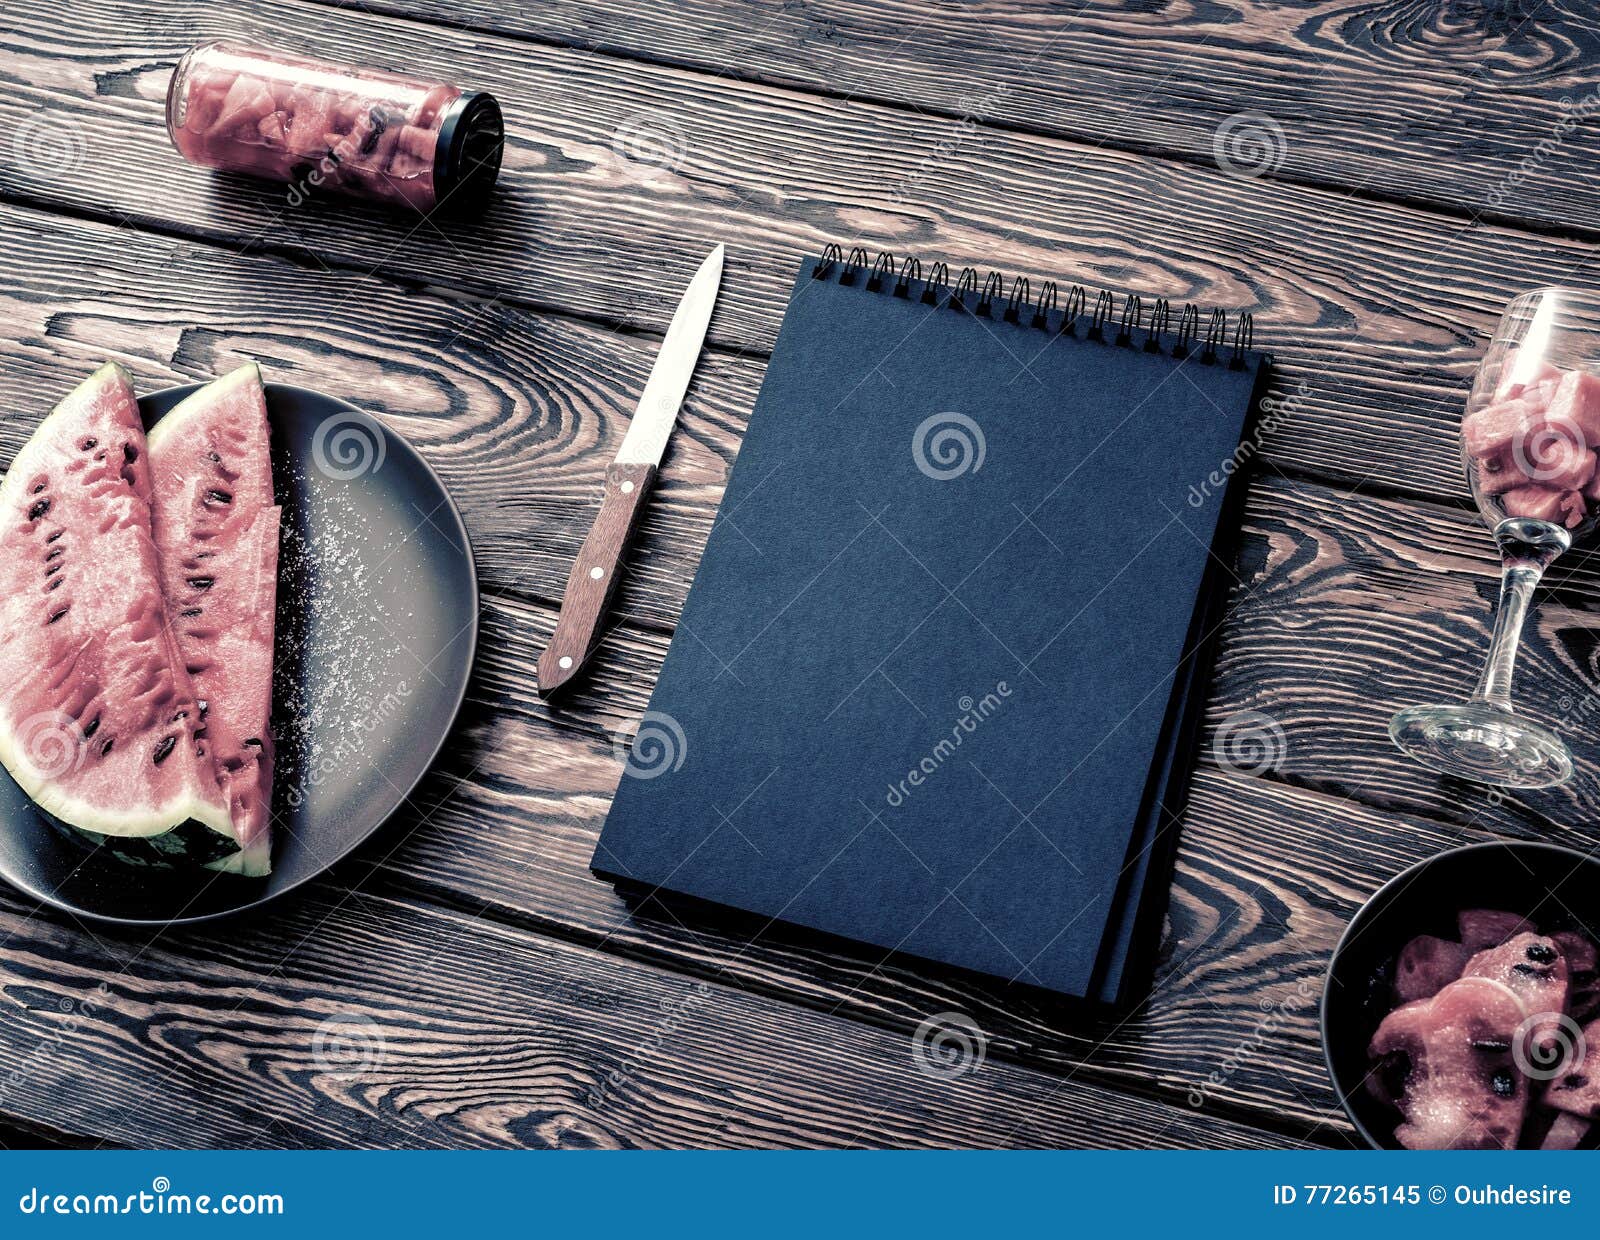 Download Chalkboard Mockup On Desk With Watermelon. Top View. Stock ...